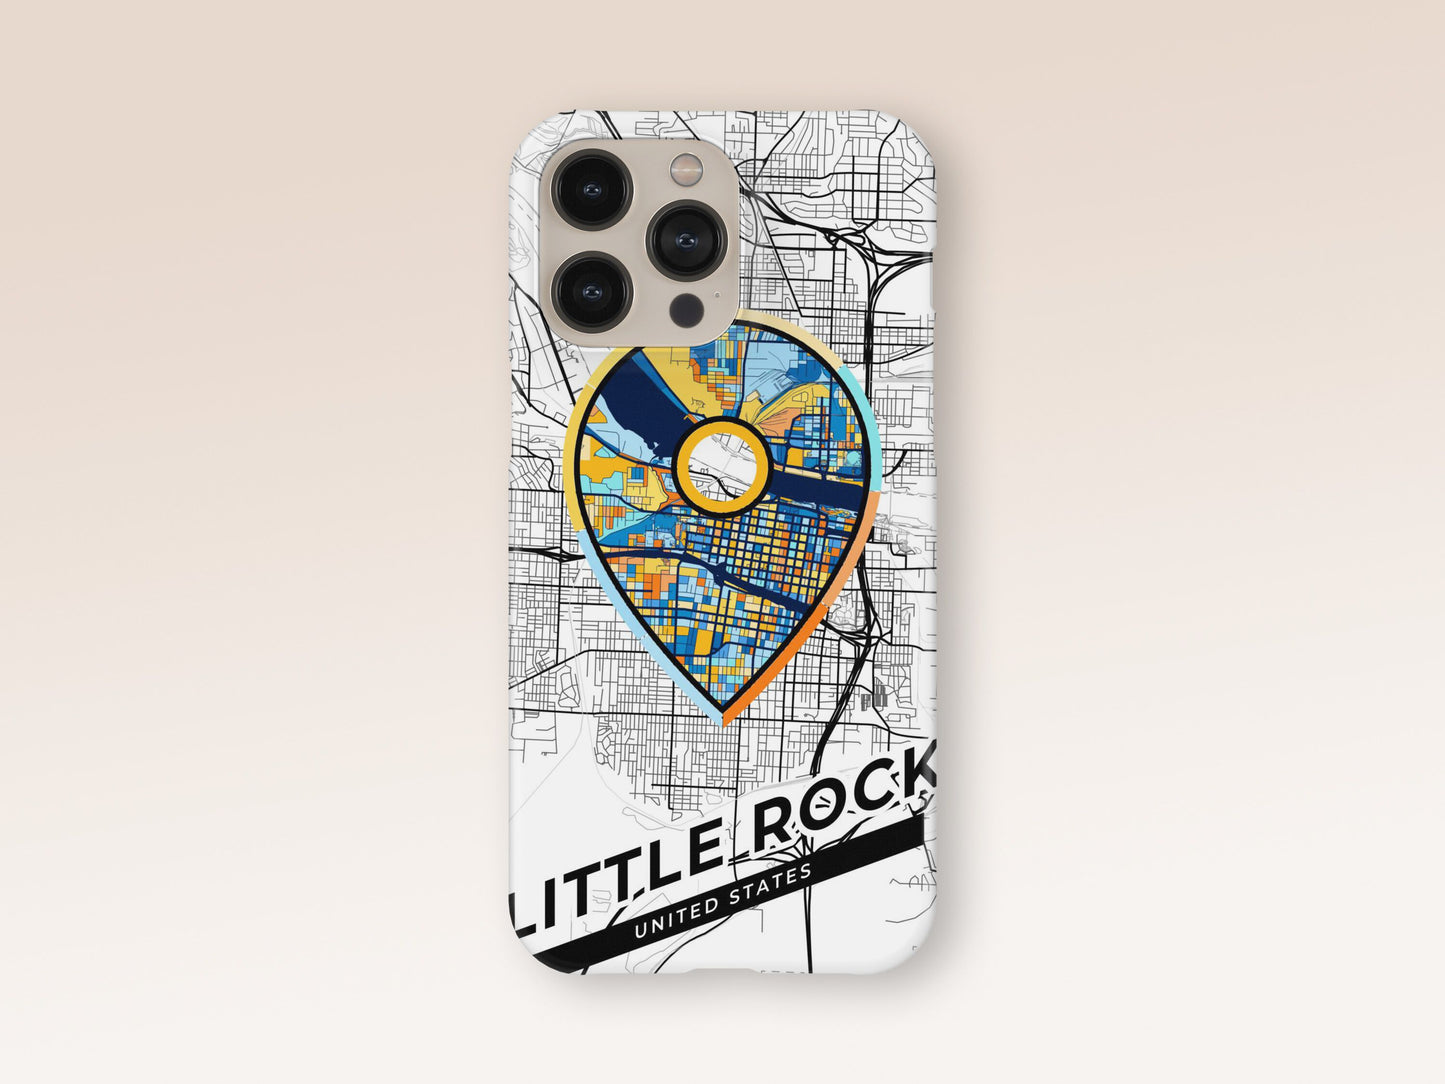 Little Rock Arkansas slim phone case with colorful icon. Birthday, wedding or housewarming gift. Couple match cases. 1